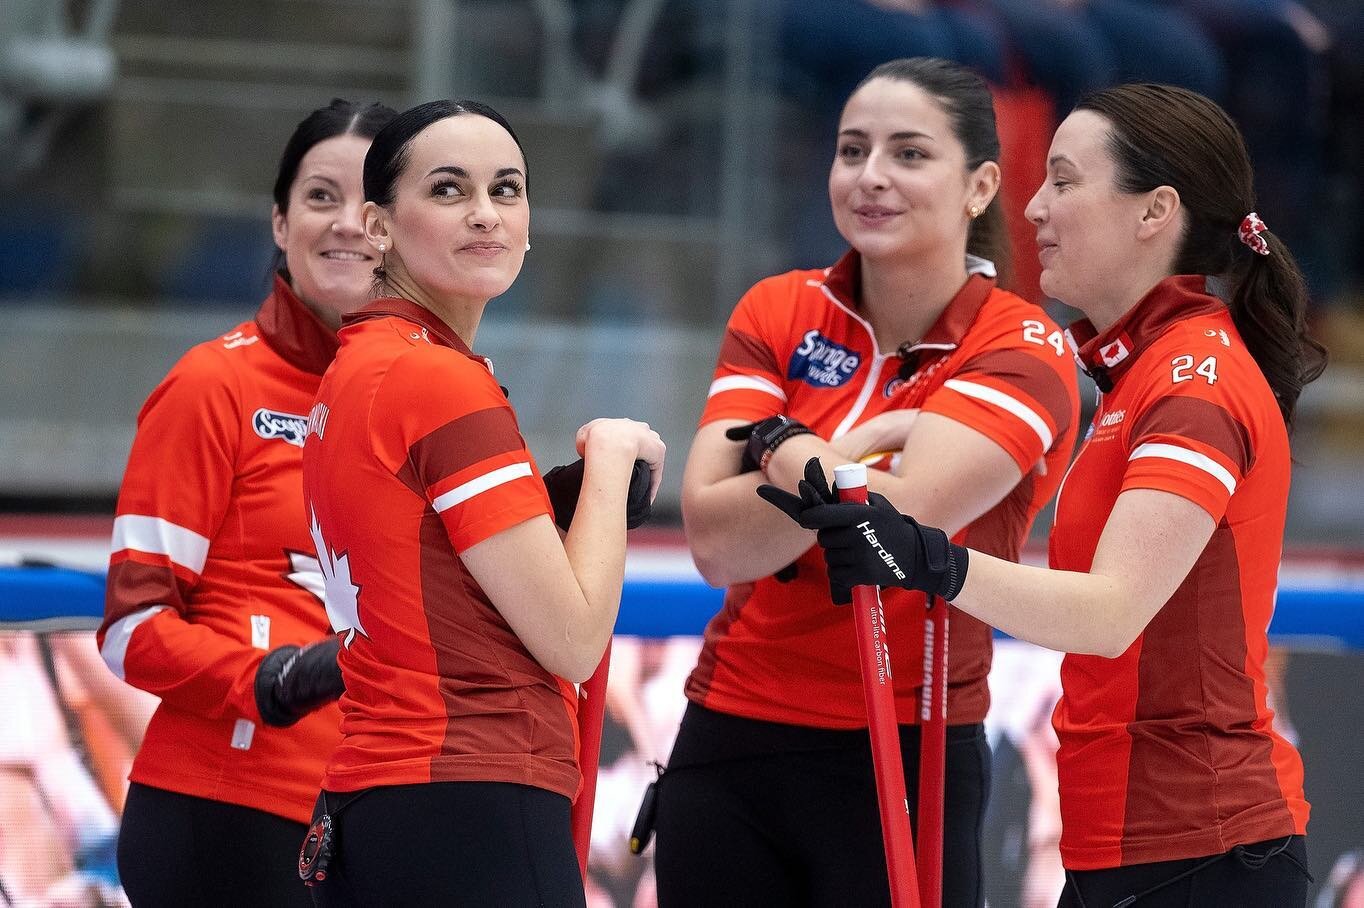 It was a week of hard fought battles, but unfortunately we came up short this year at the Scotties Tournament of Hearts. 

We would like to take this opportunity to thank our families, sponsors and loyal fans for their support this week. It means the